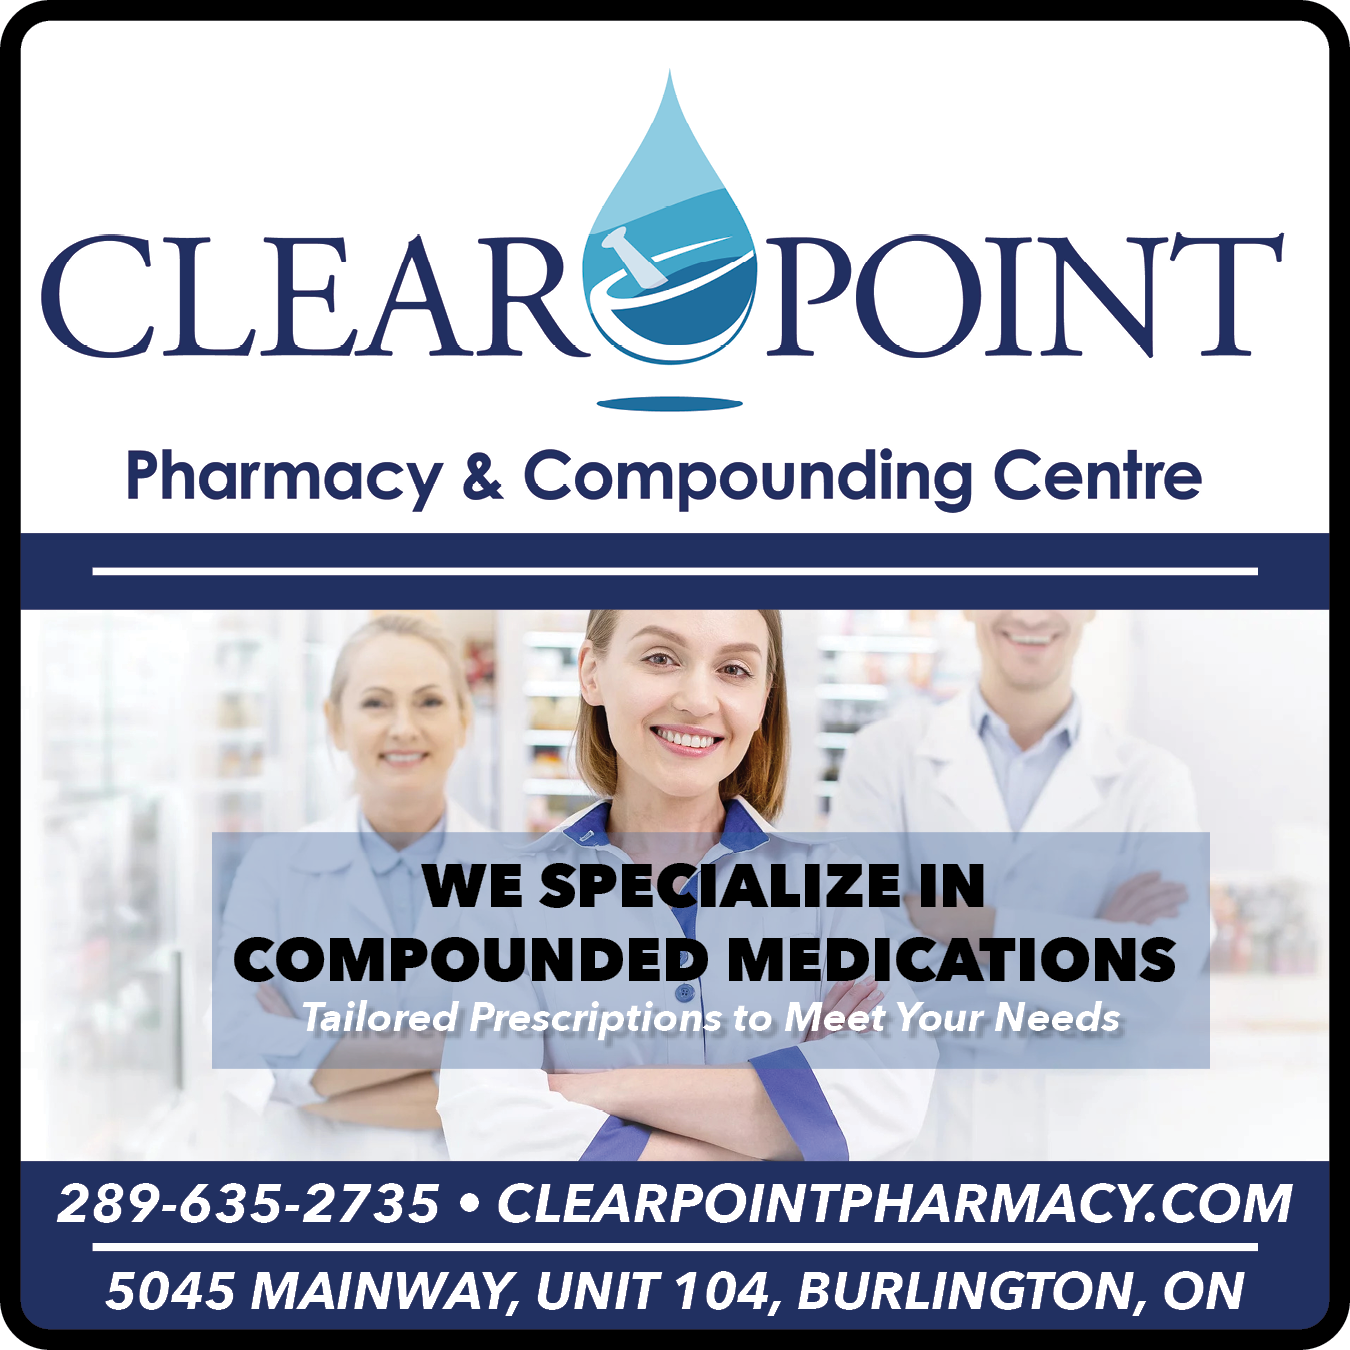 Clearpoint Pharmacy & Compounding Centre